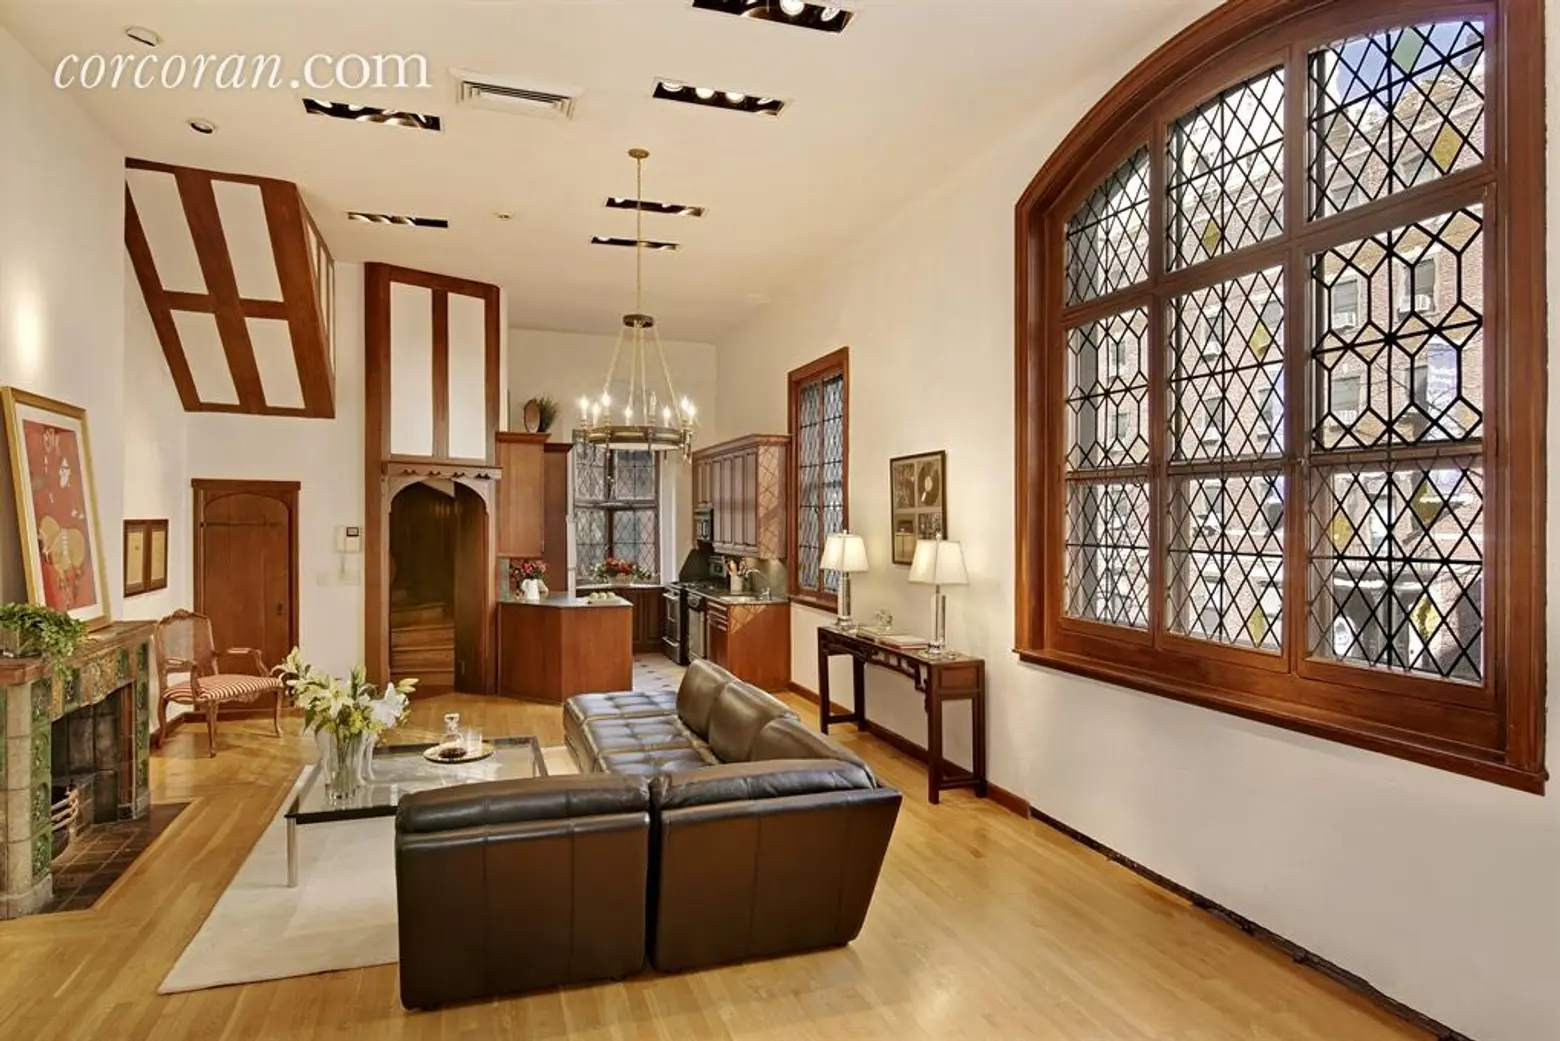 A Former Engraver’s Studio in Sniffen Court, Now a Townhouse, Asks $6.45 Million